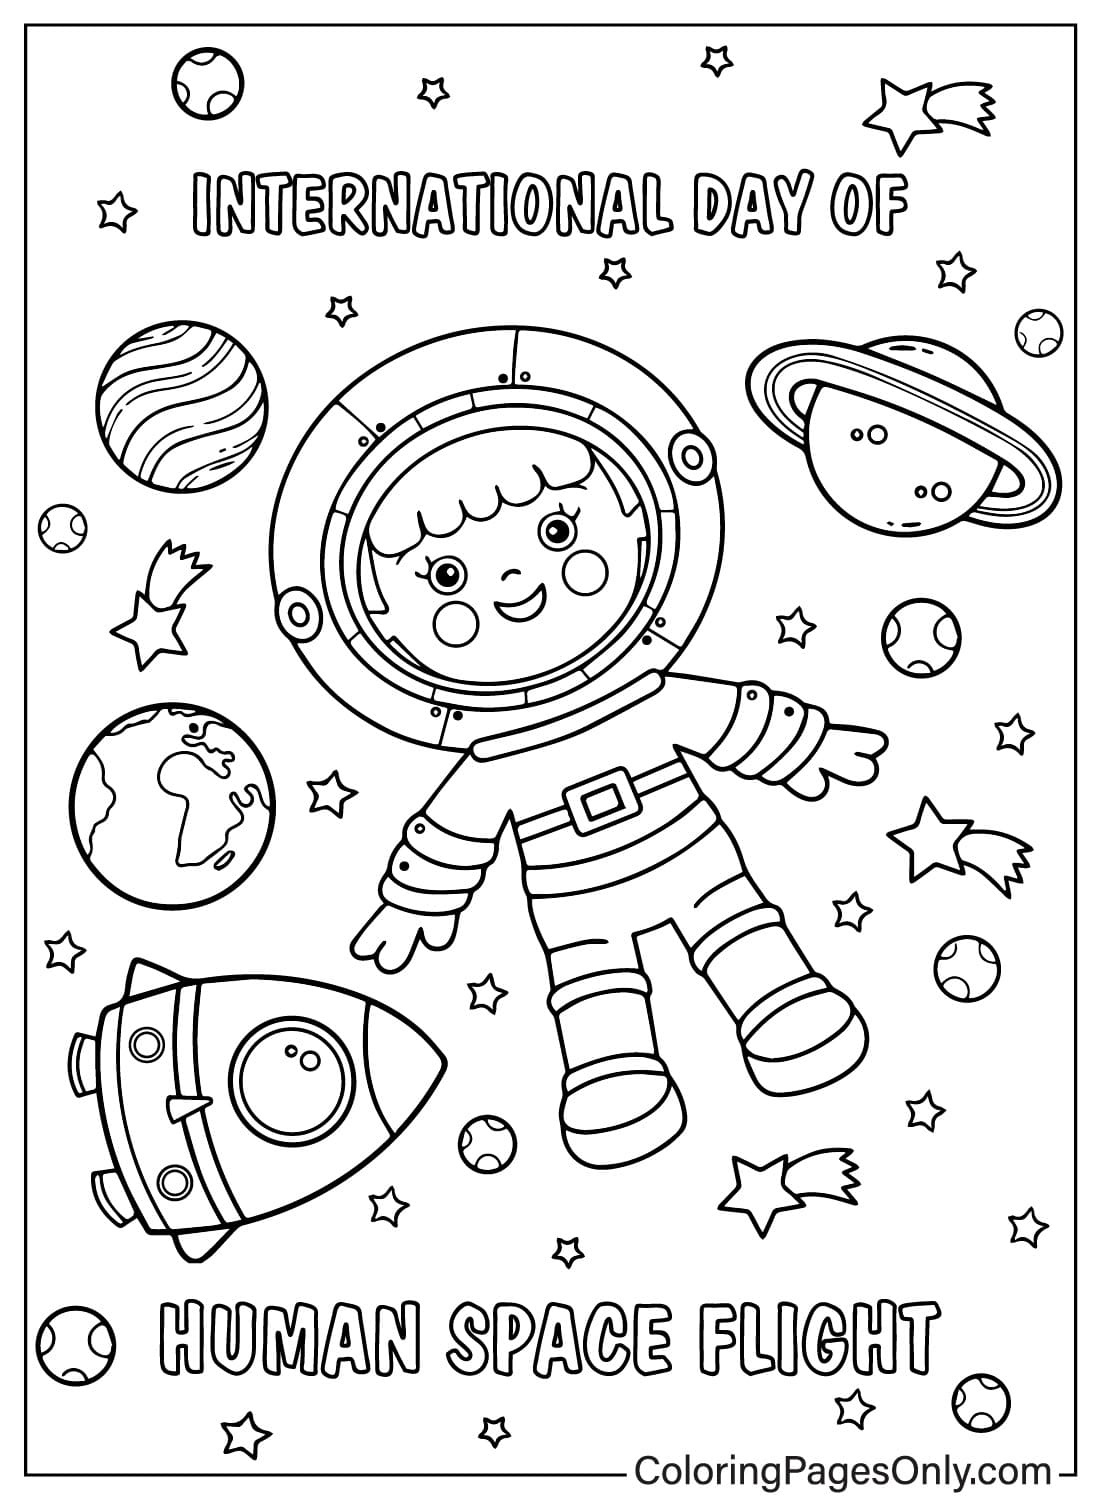 International Day of Human Space Flight to Color from International Day of Human Space Flight